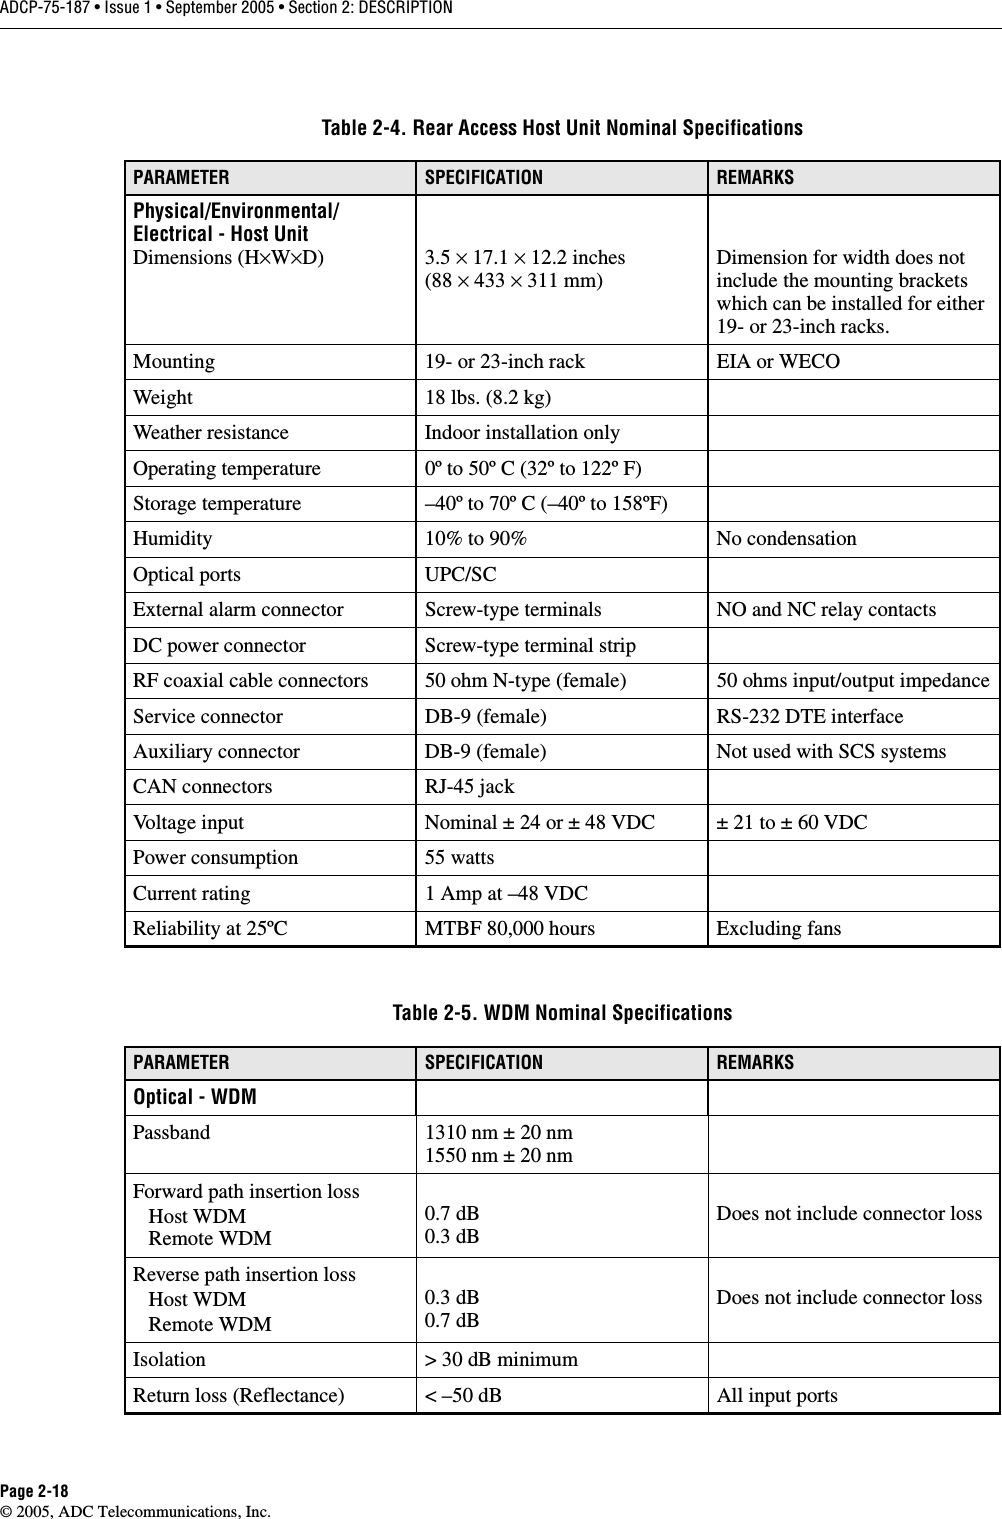 ADCP-75-187 • Issue 1 • September 2005 • Section 2: DESCRIPTIONPage 2-18© 2005, ADC Telecommunications, Inc.Table 2-4. Rear Access Host Unit Nominal SpecificationsPARAMETER SPECIFICATION REMARKSPhysical/Environmental/Electrical - Host UnitDimensions (H×W×D) 3.5 × 17.1 × 12.2 inches(88 × 433 × 311 mm)Dimension for width does not include the mounting brackets which can be installed for either 19- or 23-inch racks. Mounting 19- or 23-inch rack EIA or WECOWeight 18 lbs. (8.2 kg)Weather resistance Indoor installation onlyOperating temperature 0º to 50º C (32º to 122º F)Storage temperature –40º to 70º C (–40º to 158ºF)Humidity 10% to 90% No condensationOptical ports UPC/SCExternal alarm connector Screw-type terminals NO and NC relay contactsDC power connector Screw-type terminal stripRF coaxial cable connectors 50 ohm N-type (female) 50 ohms input/output impedanceService connector DB-9 (female) RS-232 DTE interfaceAuxiliary connector DB-9 (female) Not used with SCS systemsCAN connectors RJ-45 jackVoltage input Nominal ± 24 or ± 48 VDC ± 21 to ± 60 VDCPower consumption 55 wattsCurrent rating 1 Amp at –48 VDCReliability at 25ºC MTBF 80,000 hours Excluding fansTable 2-5. WDM Nominal SpecificationsPARAMETER SPECIFICATION REMARKSOptical - WDMPassband 1310 nm ± 20 nm1550 nm ± 20 nmForward path insertion loss   Host WDM   Remote WDM0.7 dB0.3 dBDoes not include connector lossReverse path insertion loss   Host WDM   Remote WDM0.3 dB0.7 dBDoes not include connector lossIsolation &gt; 30 dB minimumReturn loss (Reflectance) &lt; –50 dB All input ports